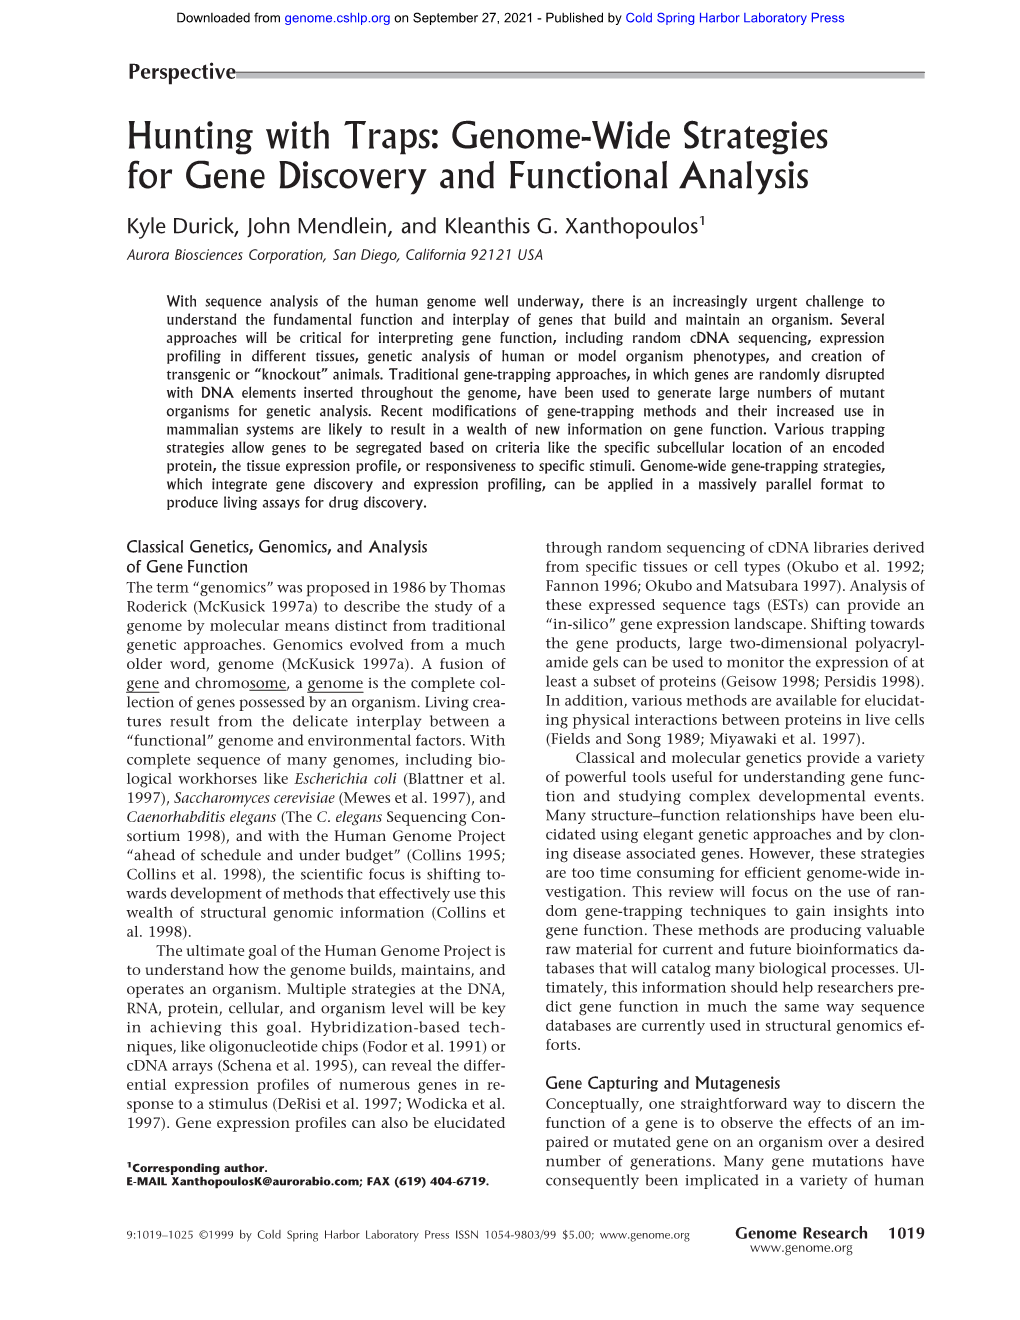 Genome-Wide Strategies for Gene Discovery and Functional Analysis